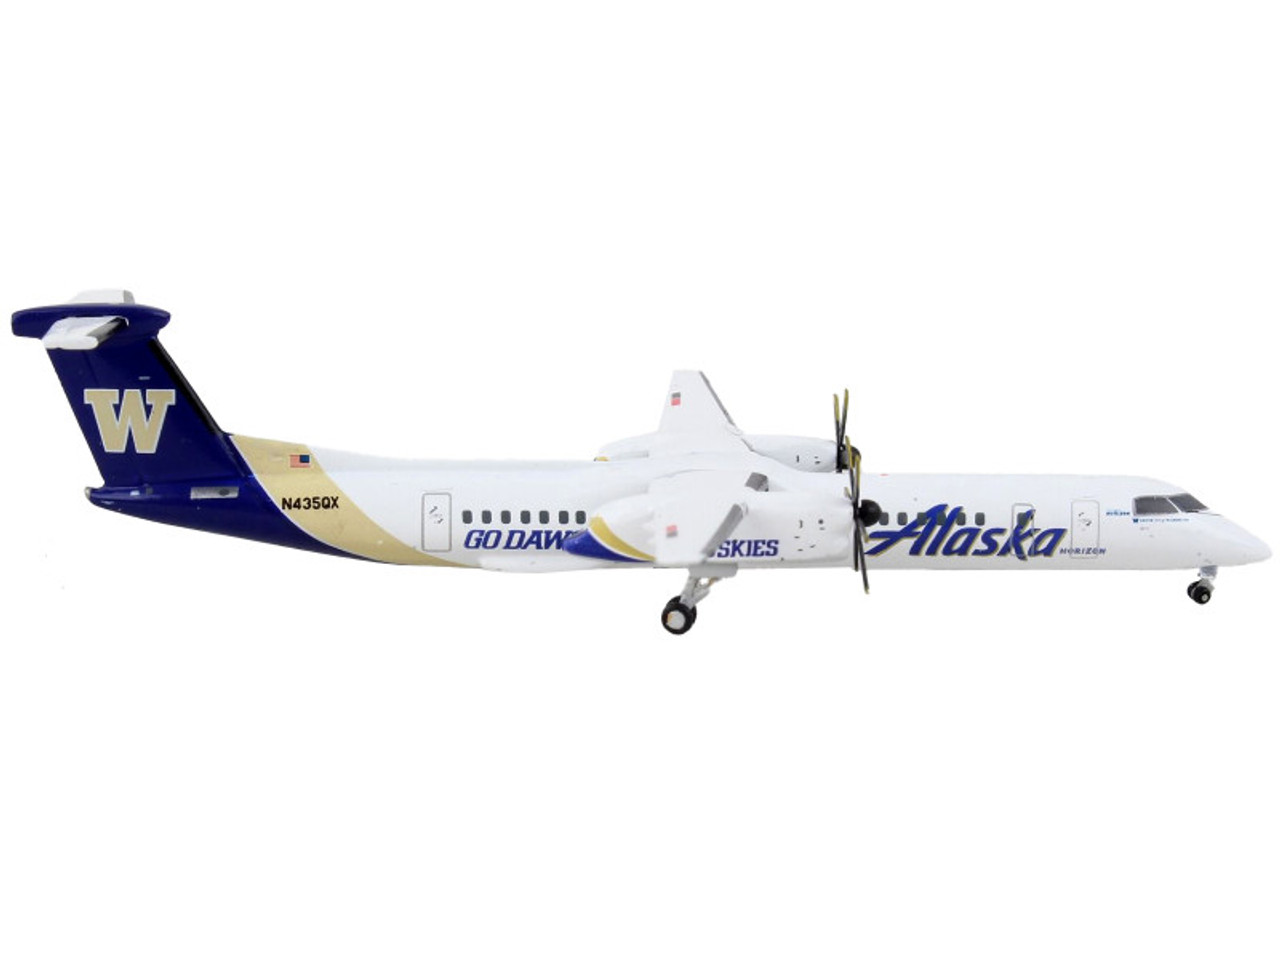 Bombardier Q400 Commercial Aircraft "Alaska Airlines - University of Washington Huskies" White with Purple and Gold Tail 1/400 Diecast Model Airplane by GeminiJets